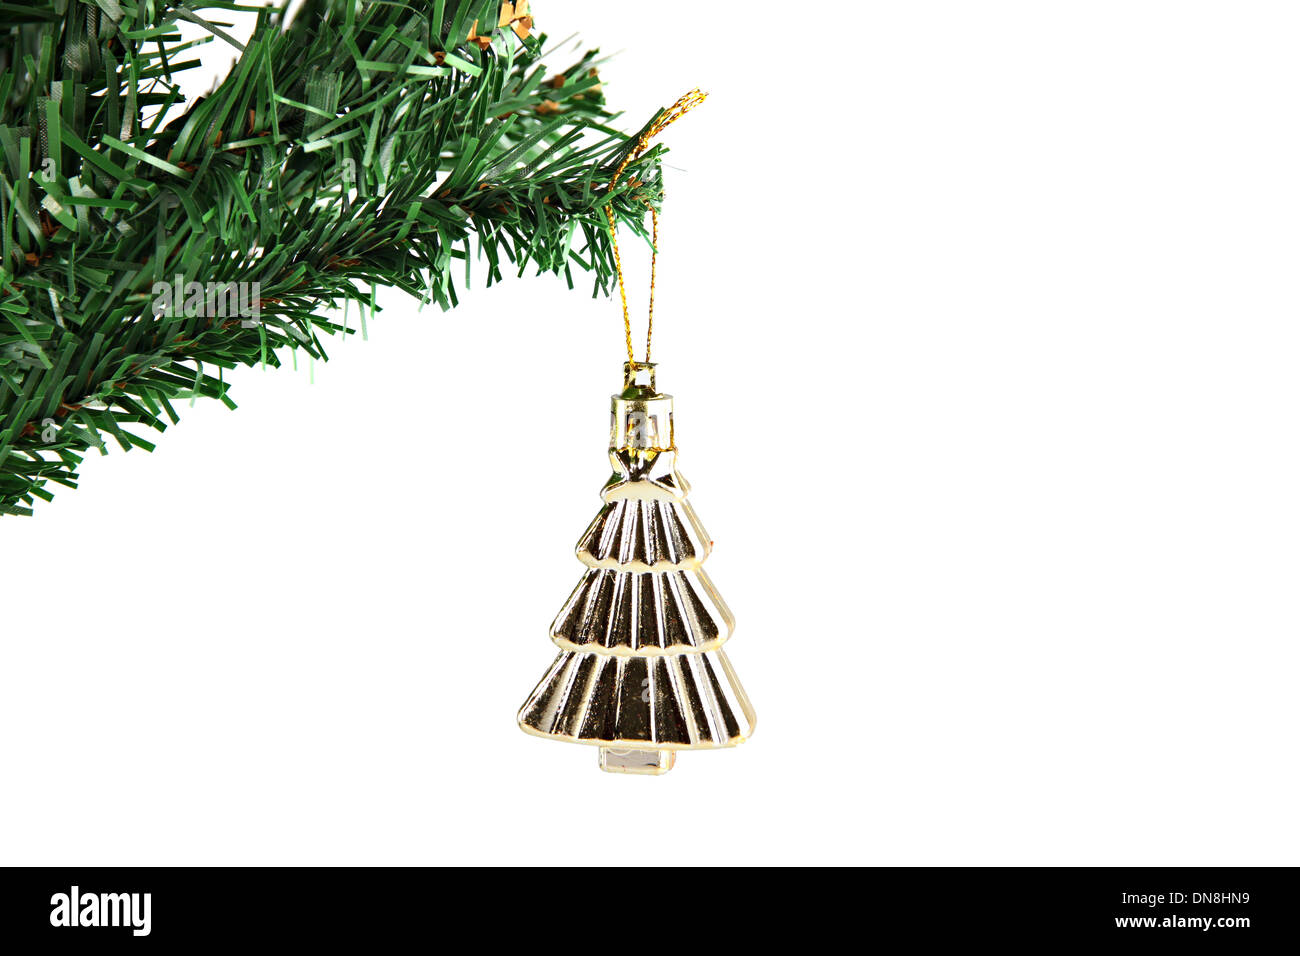 The Picture Golden umbrella hanging on branch Christmas tree. Stock Photo